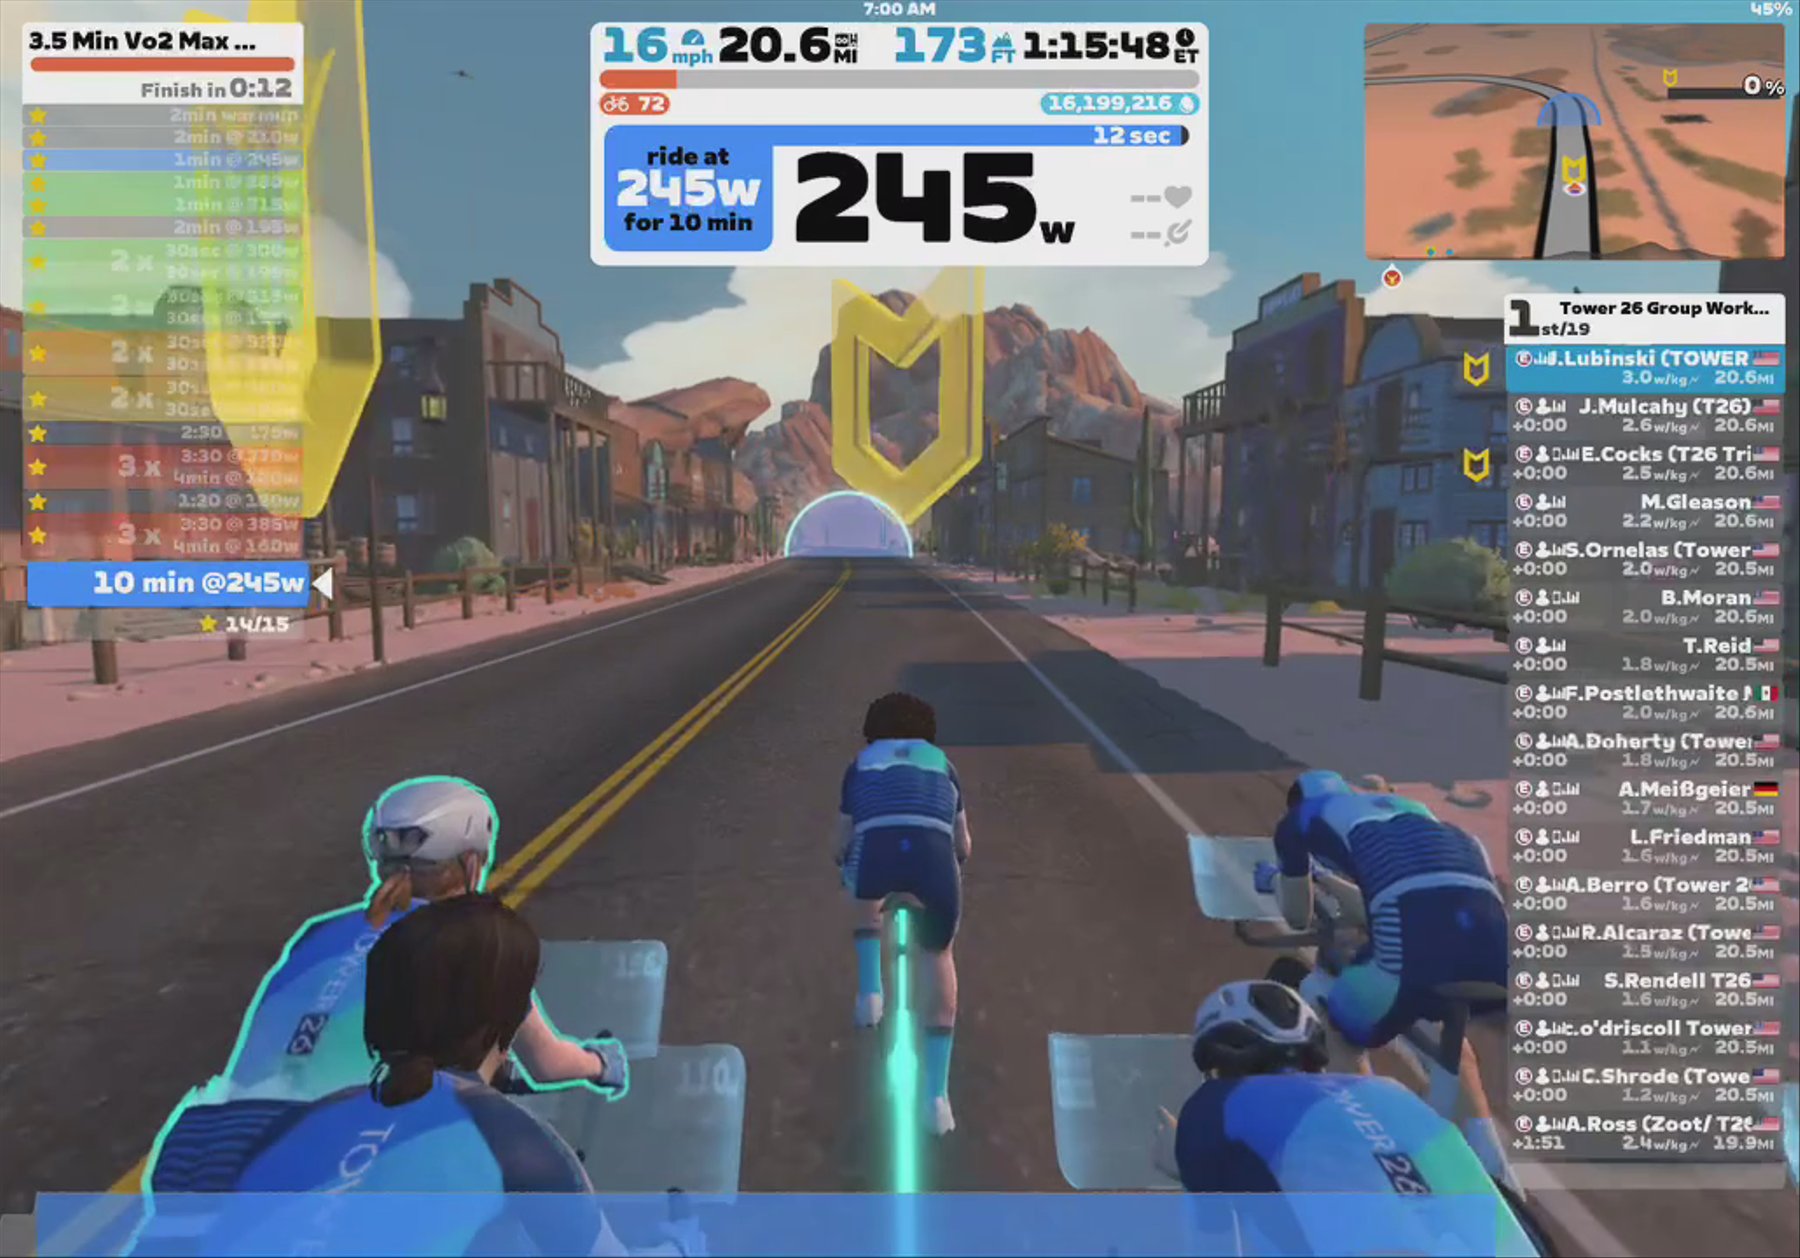 Zwift - Group Workout: Tower 26 Group Workout (E) on Tempus Fugit in Watopia